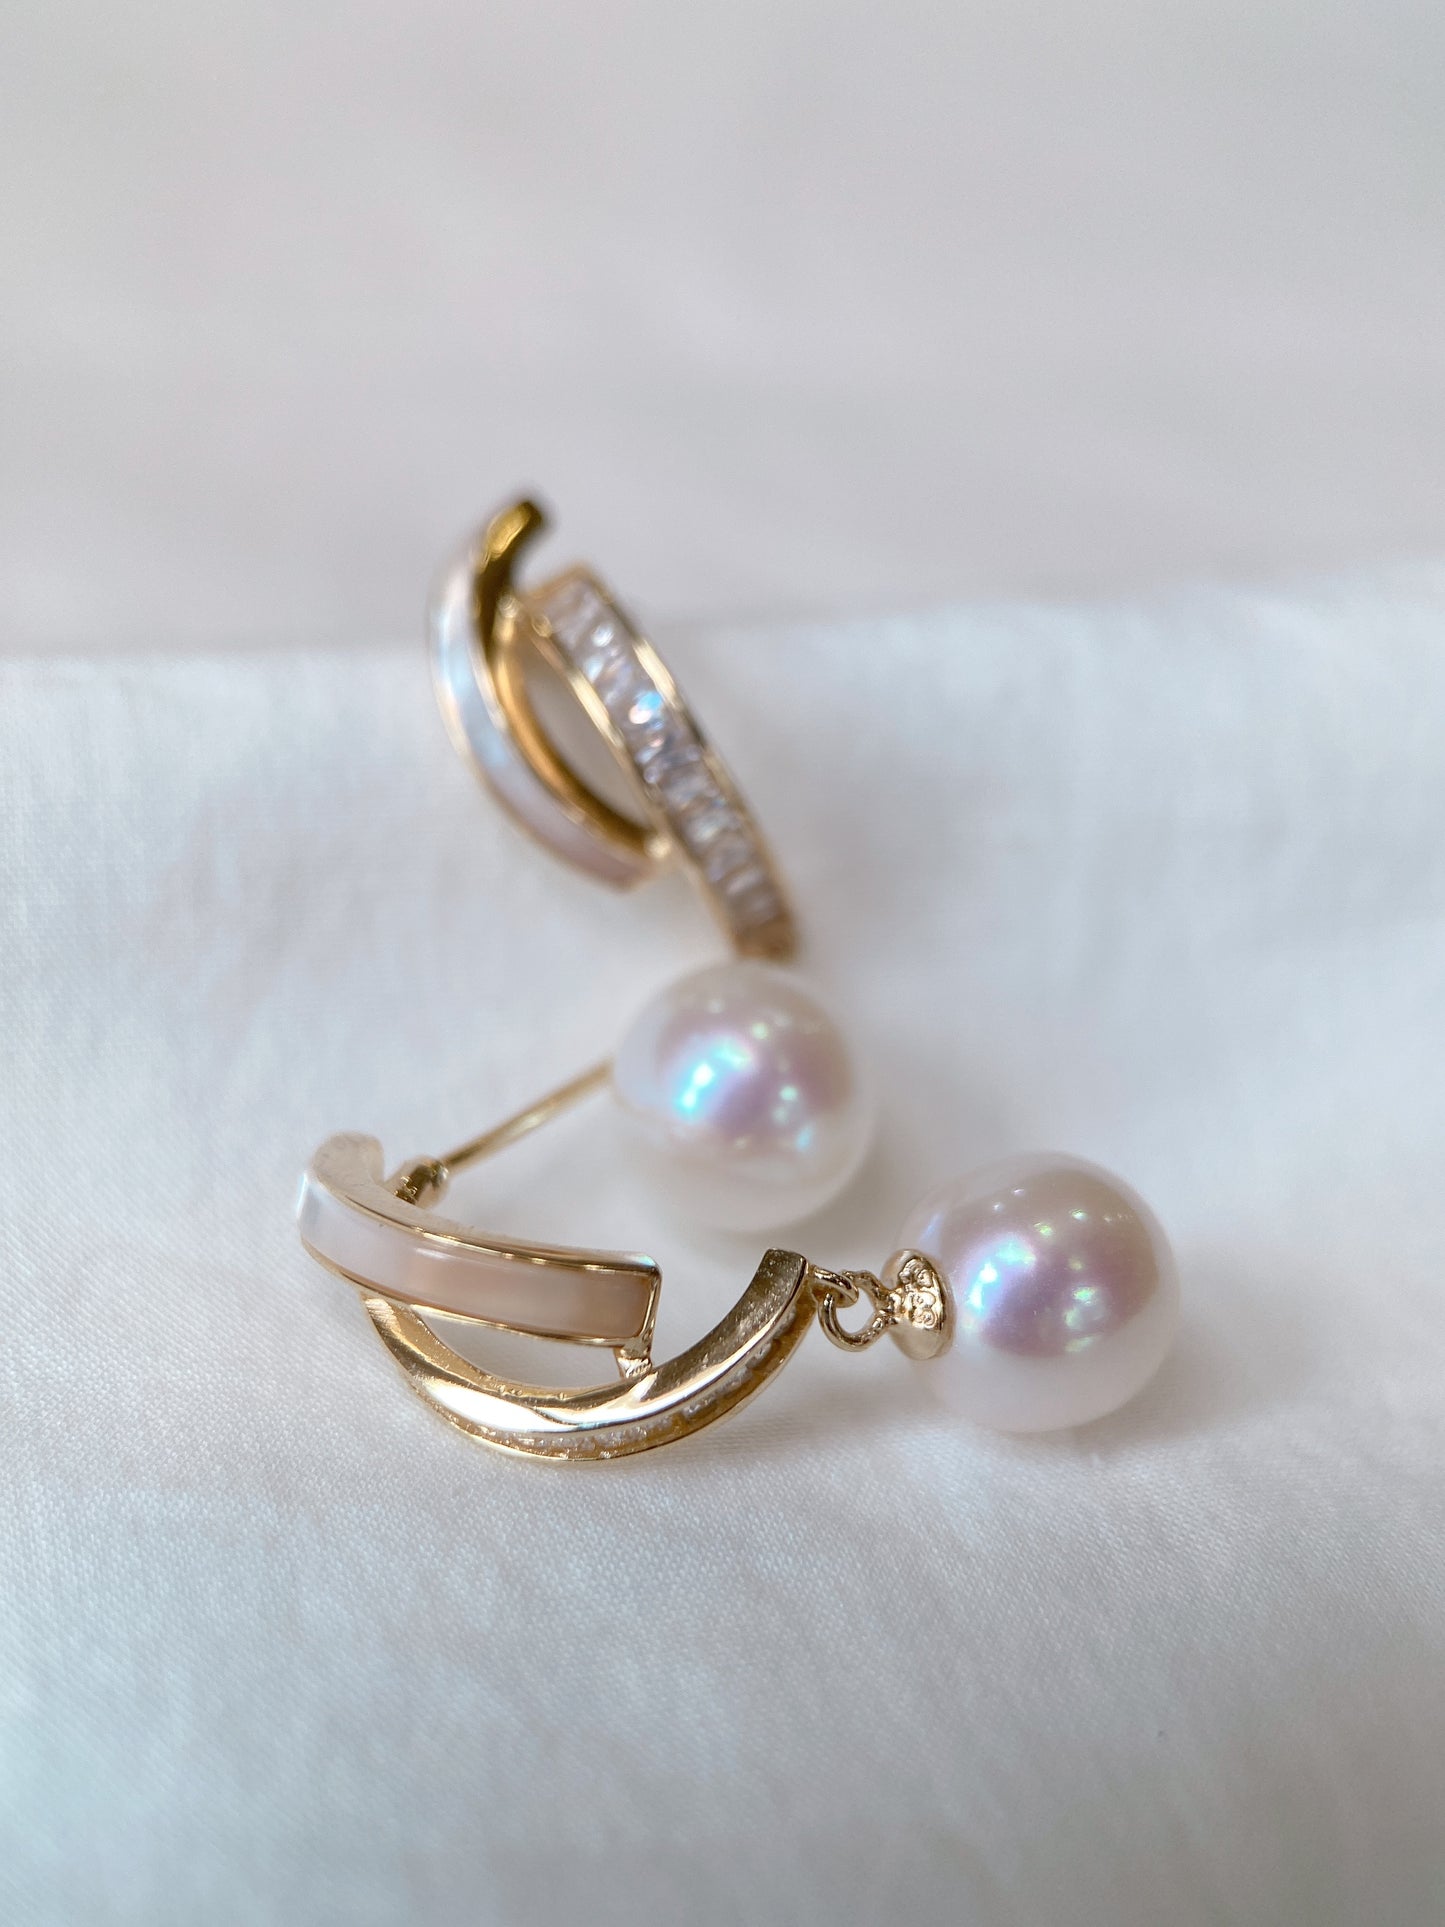 Yellow Gold Plated Sterling Silver Freshwater Pearl Earrings with Mother of Pearl, ER49